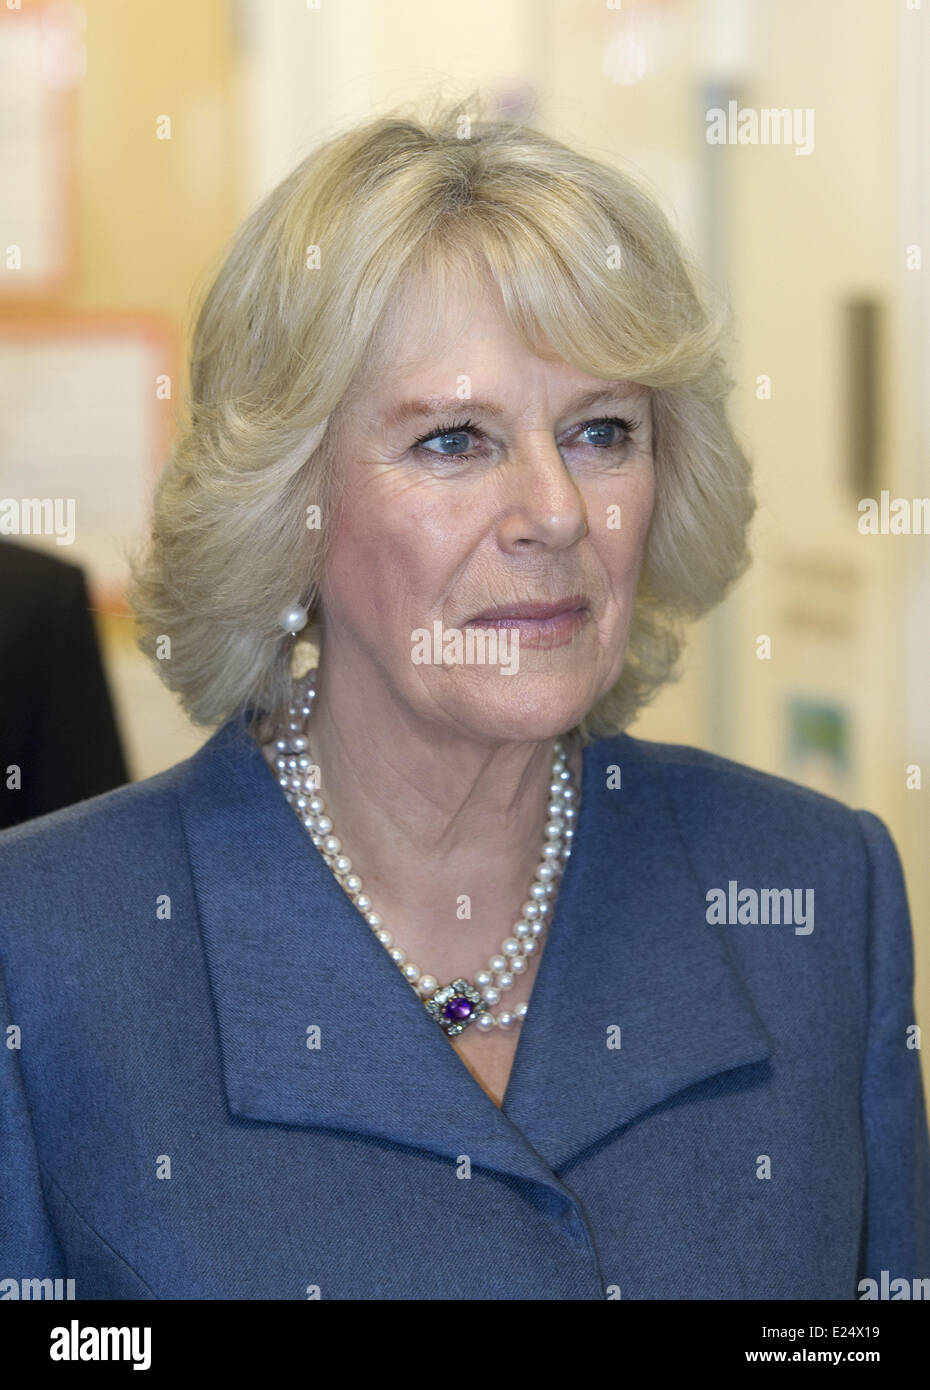 Camilla, Duchess of Cornwall, meets diabetes patients and their families in the University College Hospital Inpatient Adolescent Ward and tours the ward's school room and games room before attending a reception with staff and JDRF supporters at The University College Hospital. Camilla, who is President of the JDRF type 1 diabetes charity, plays pool with a young patient at the unit and War Horse actor Jeremy Irvine, who suffers from the condition  Featuring: Camilla,Duchess of Cornwall Where: London, Royaume Uni When: 31 Jan 2013 Stock Photo